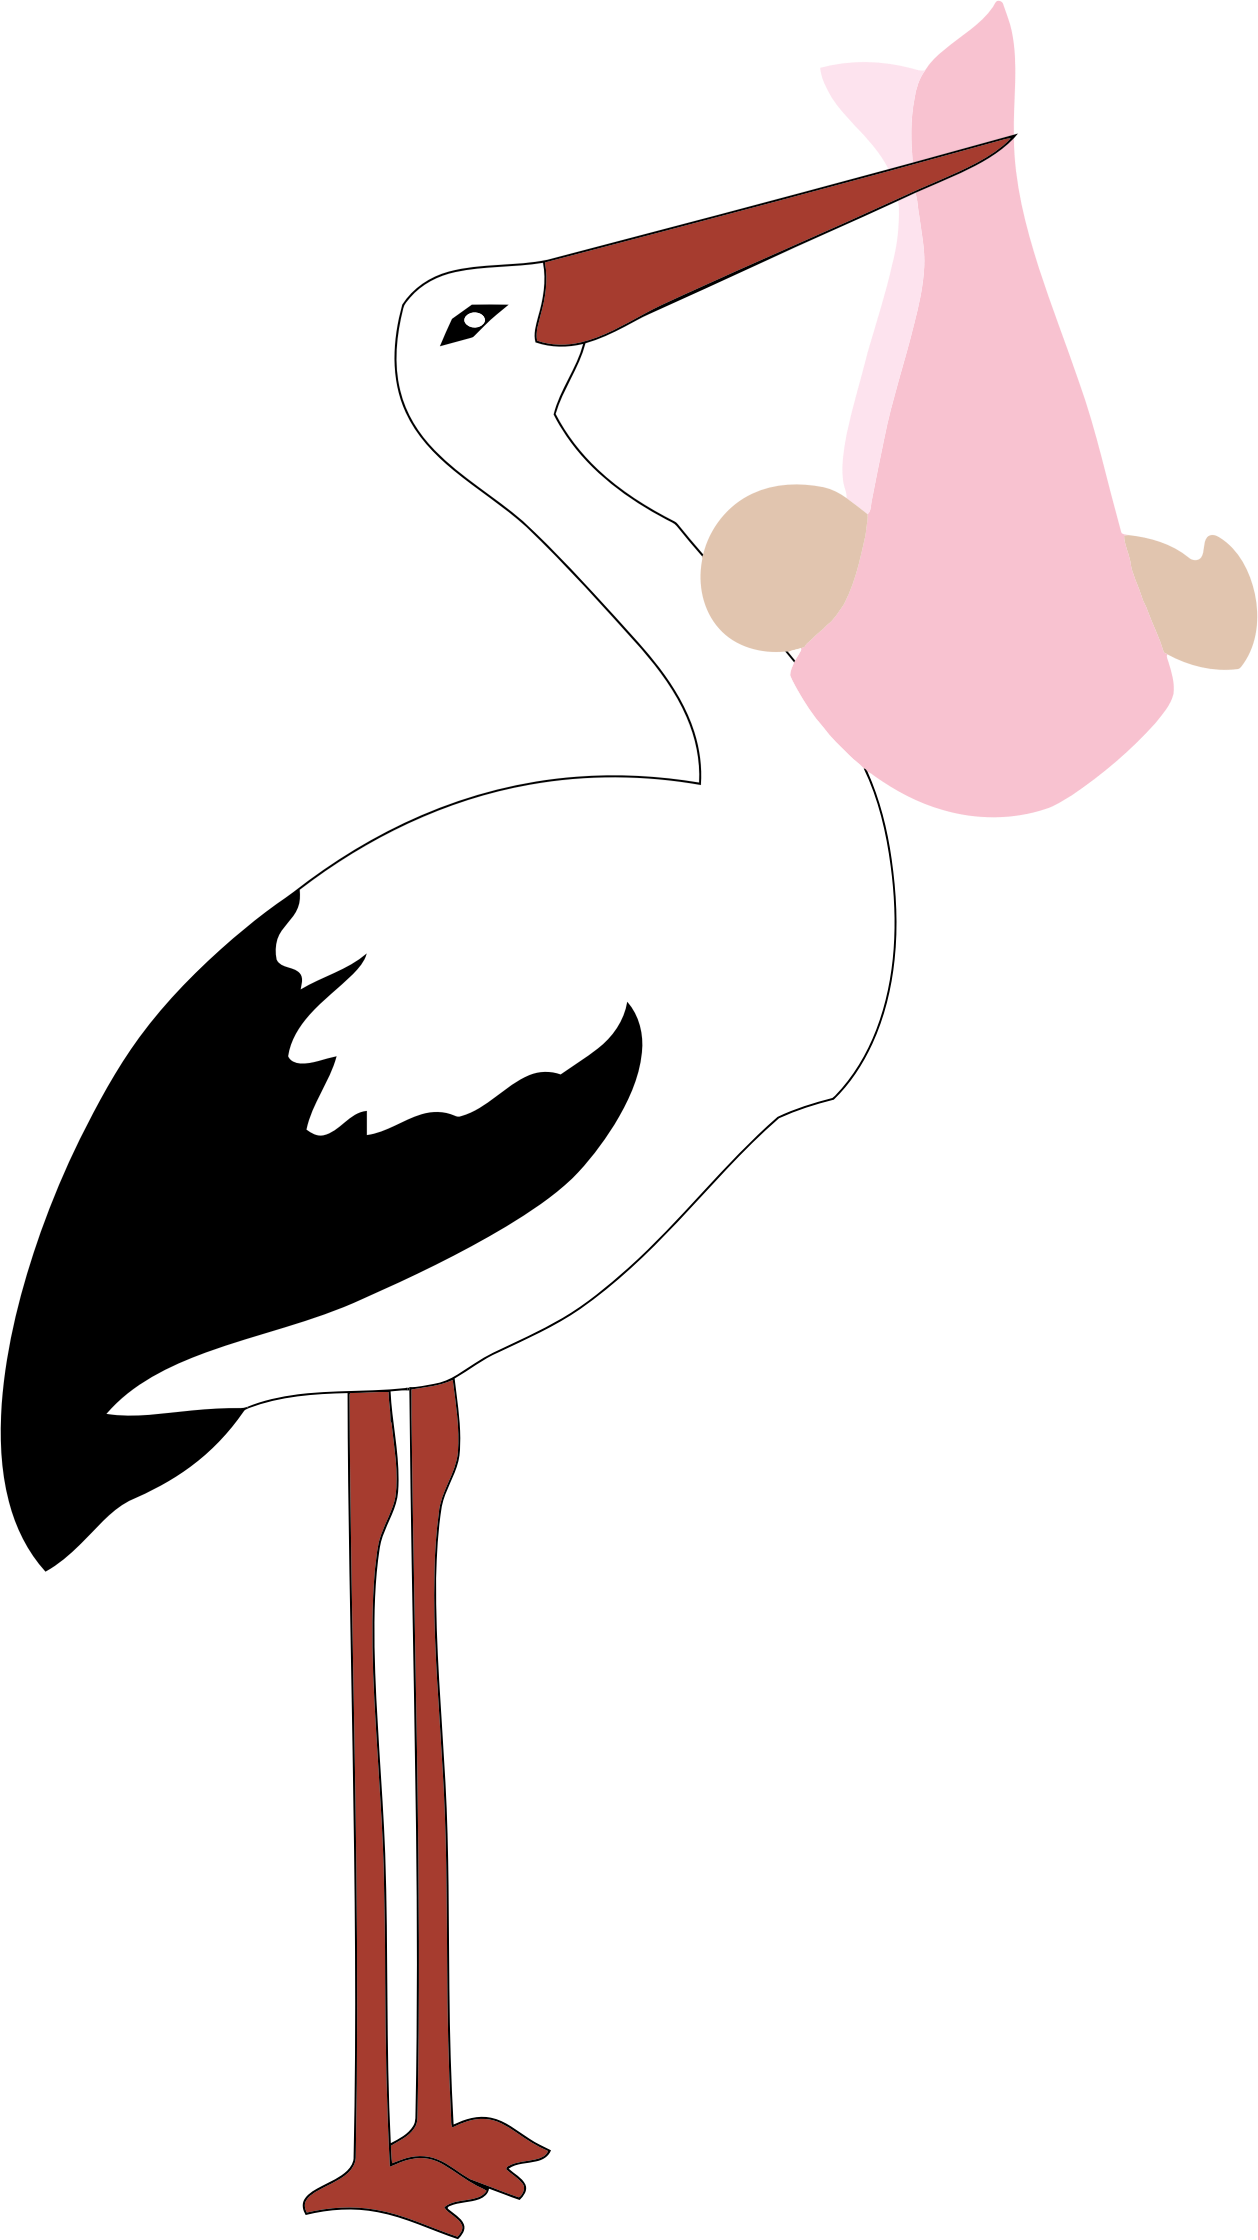 Stork clipart baby silhouette, Stork baby silhouette Transparent FREE